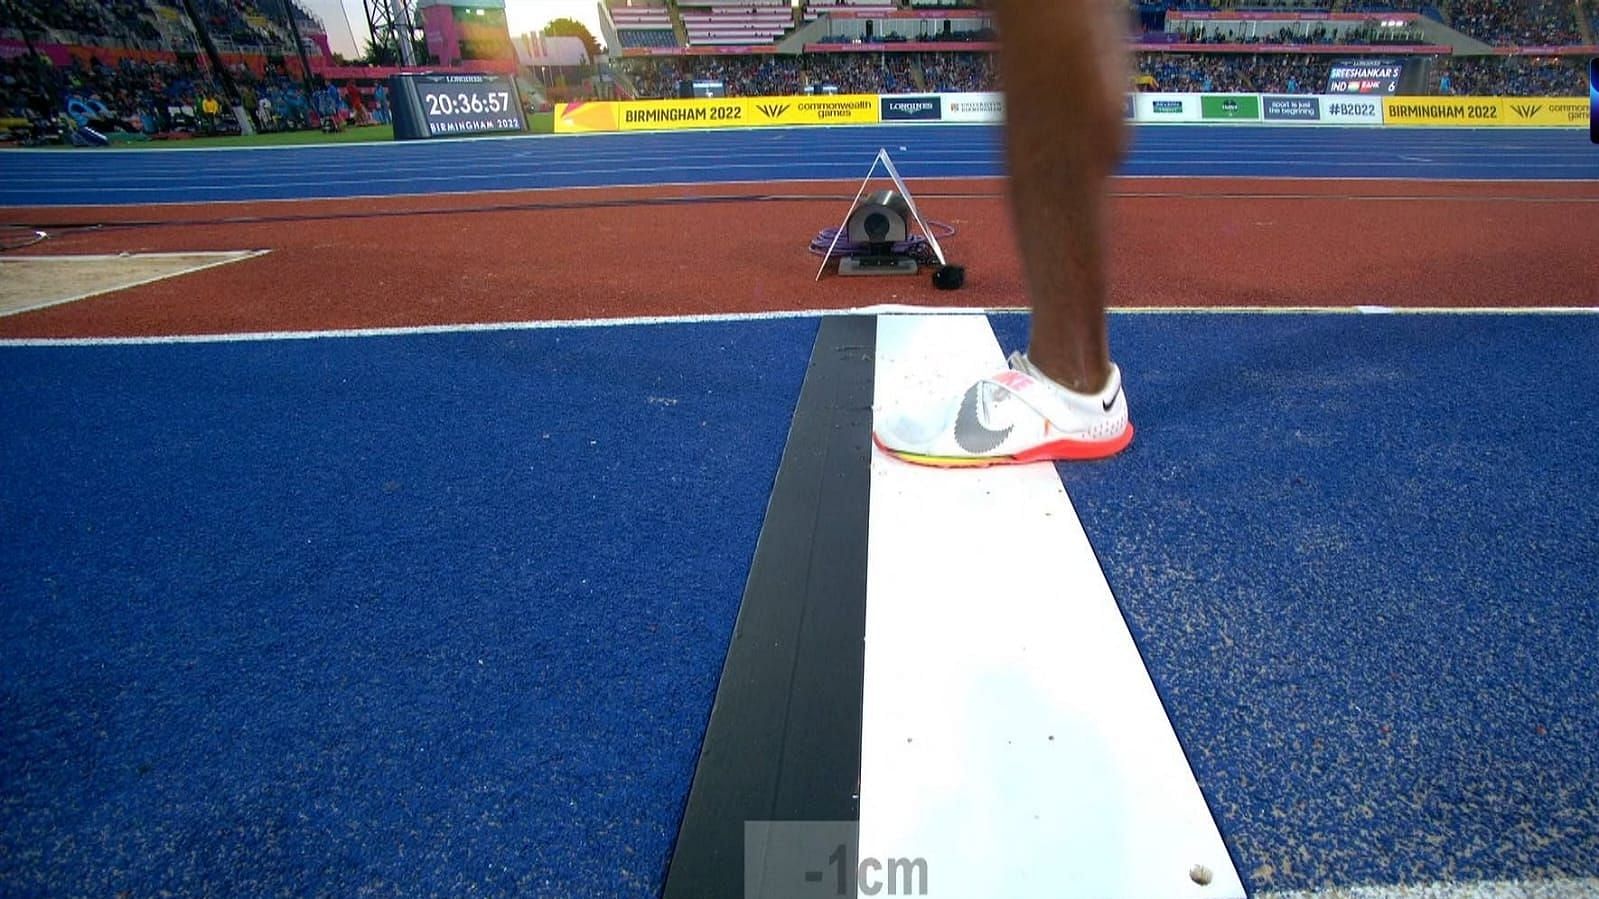 <div class="paragraphs"><p>The new laser-equipped take-off board flagged India's Murali Sreeshankar twice by extremely narrow margins for crossing the line and committing a foul during the men's long jump final at the 2022 Commonwealth Games.&nbsp;</p></div>